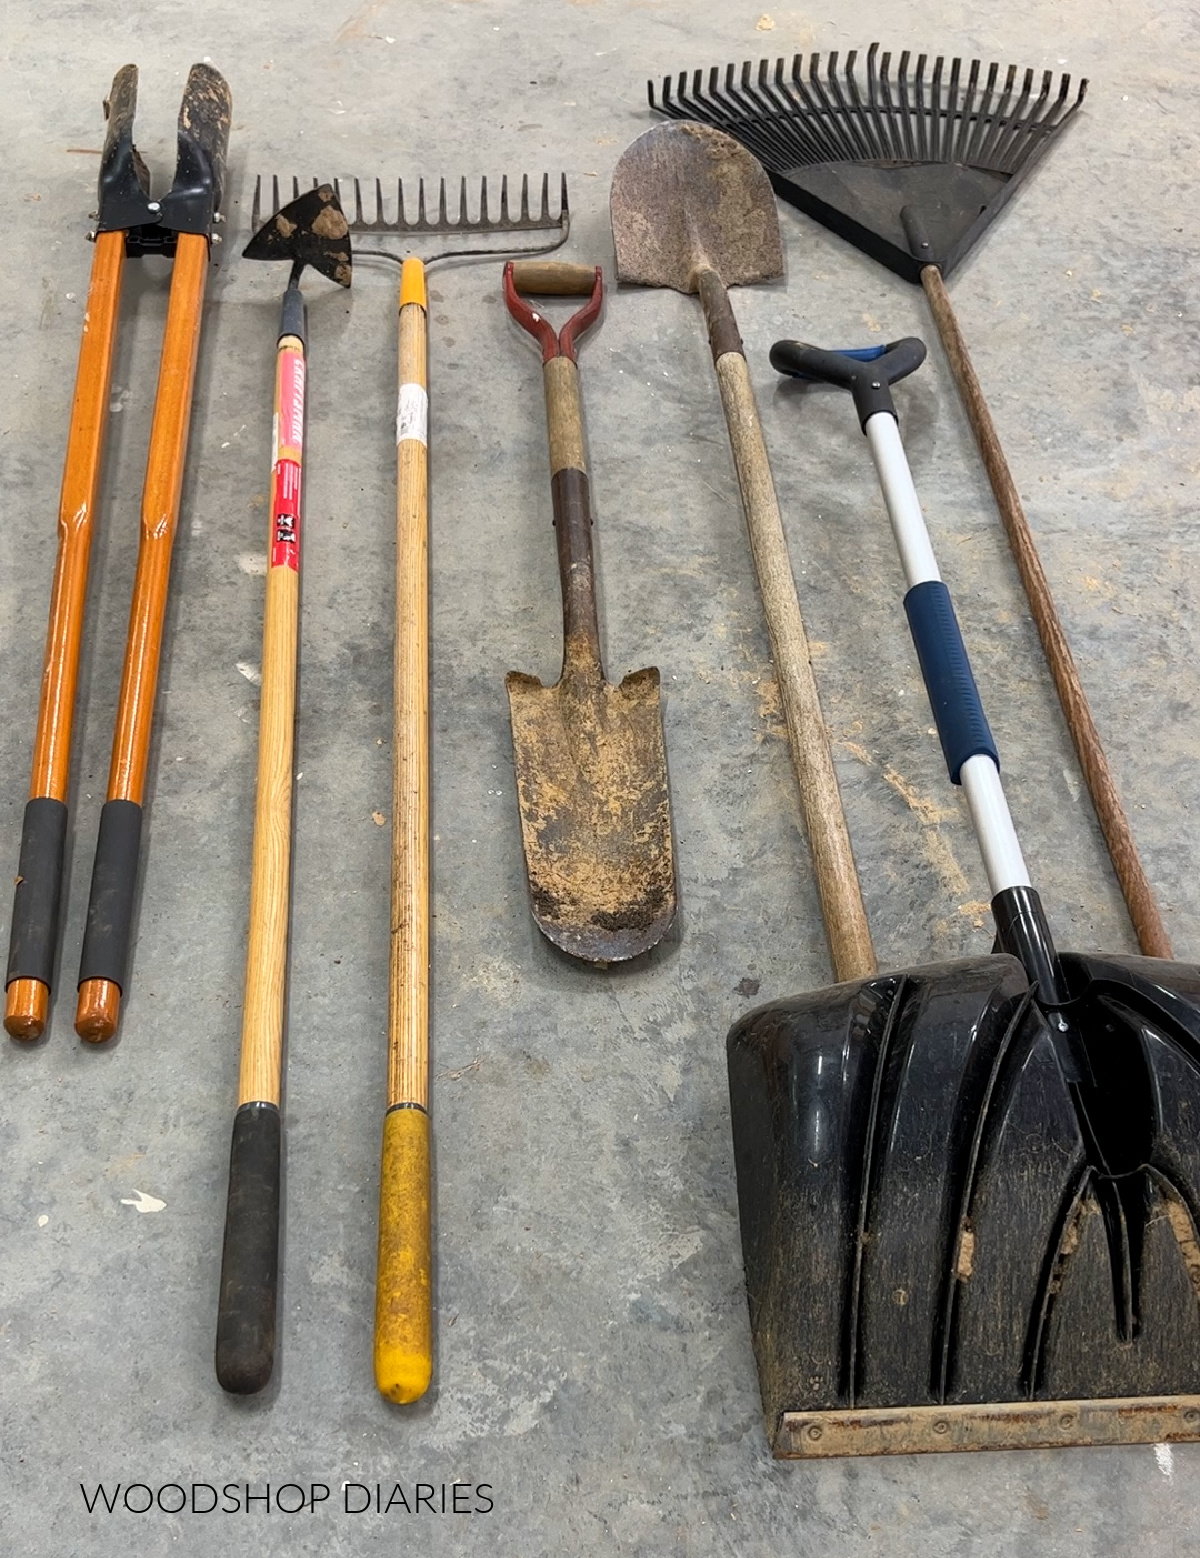 shovels, rakes and yard tools laid out on concrete floor